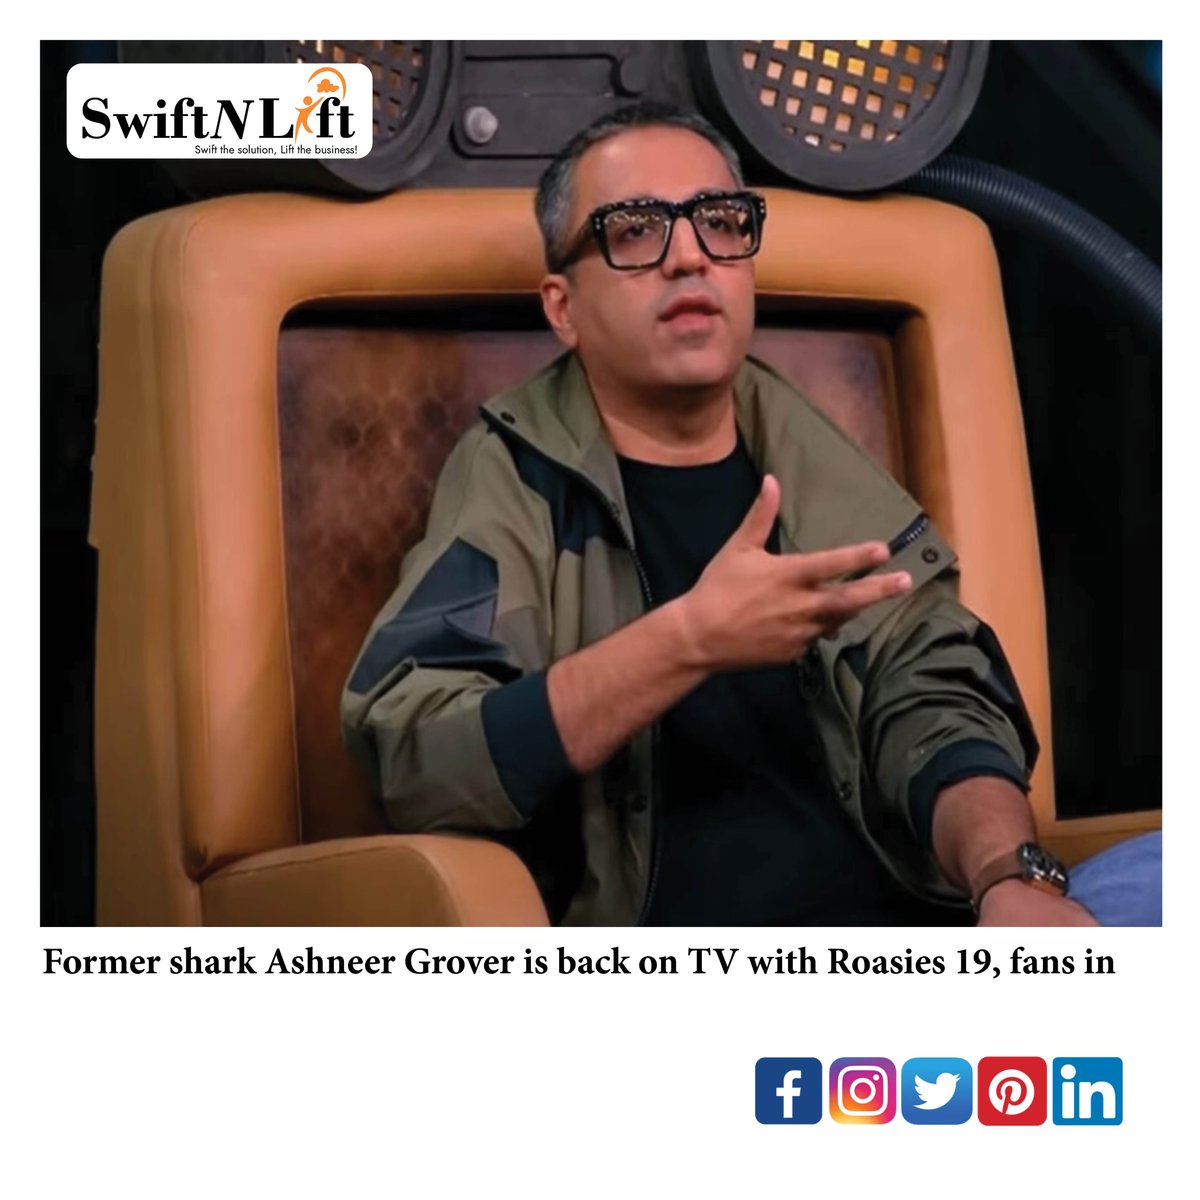 After a year away from television, Ashneer Grover is back with Roadies 19: Karm ya Kaand. His participation in the show's latest promo left many perplexed, with some even doubting his presence and project selection. #ashneergrover #sharktank #roadies19 #entrepreneur #swiftnlift